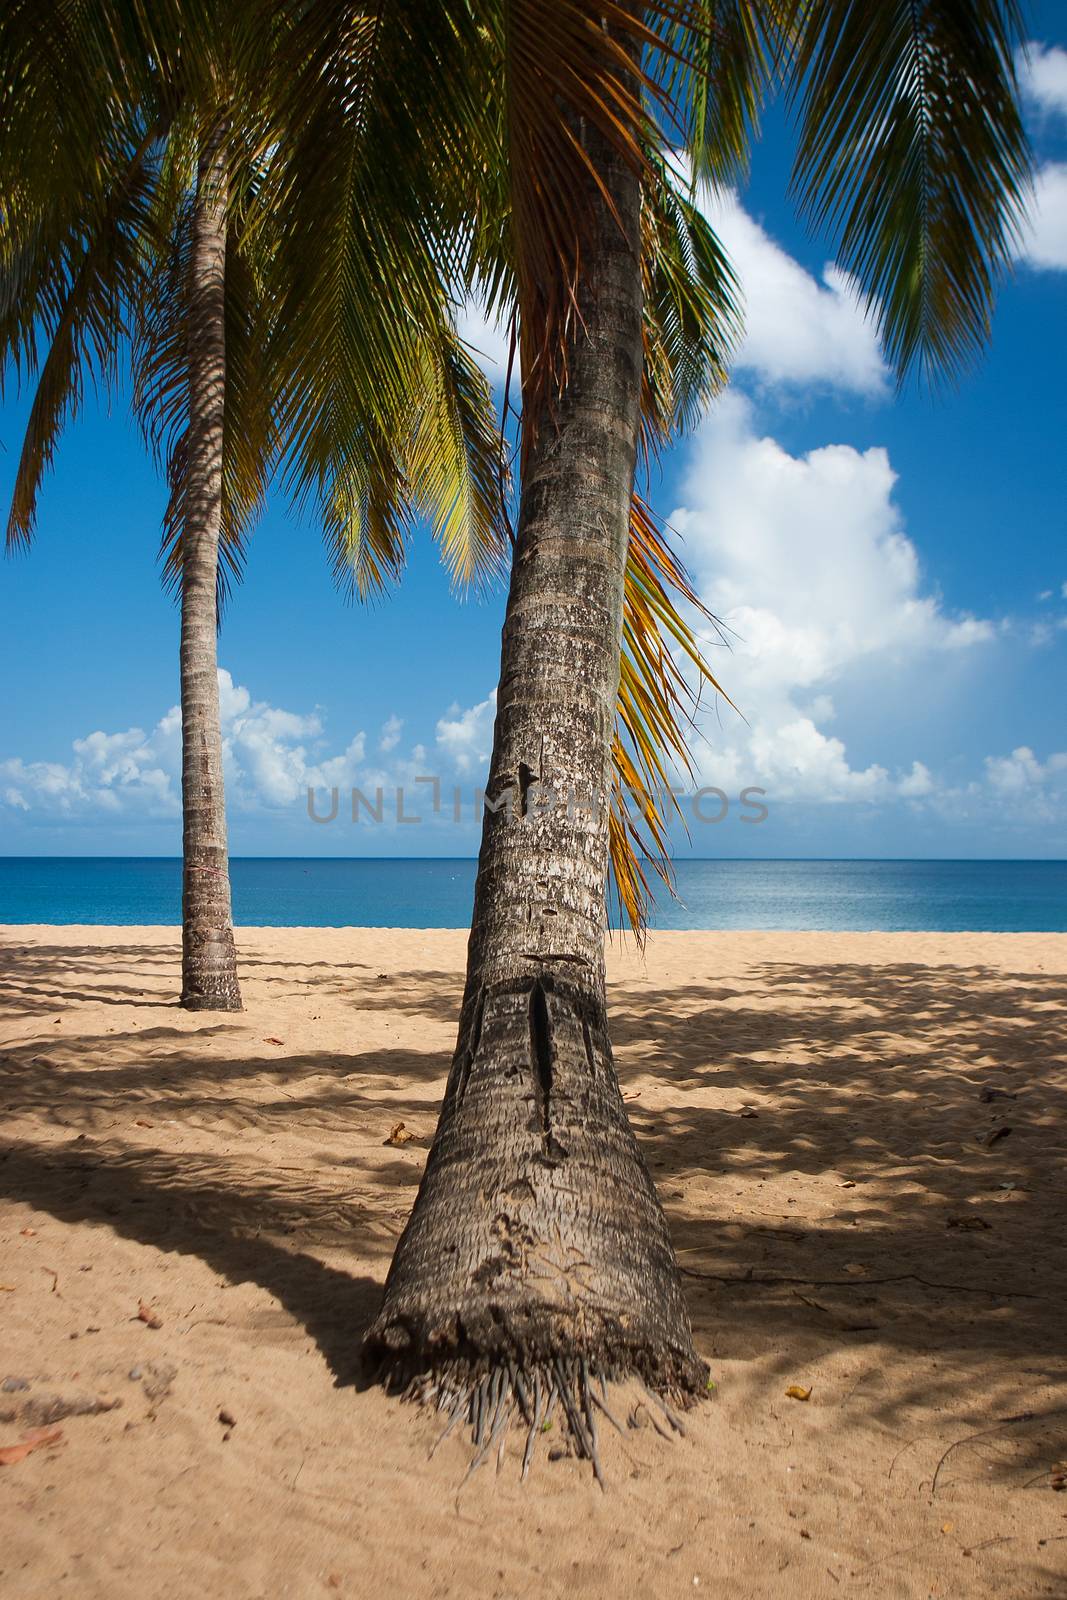 Beach of Grande Anse, Deshaies, Guadeloupe by CaptureLight